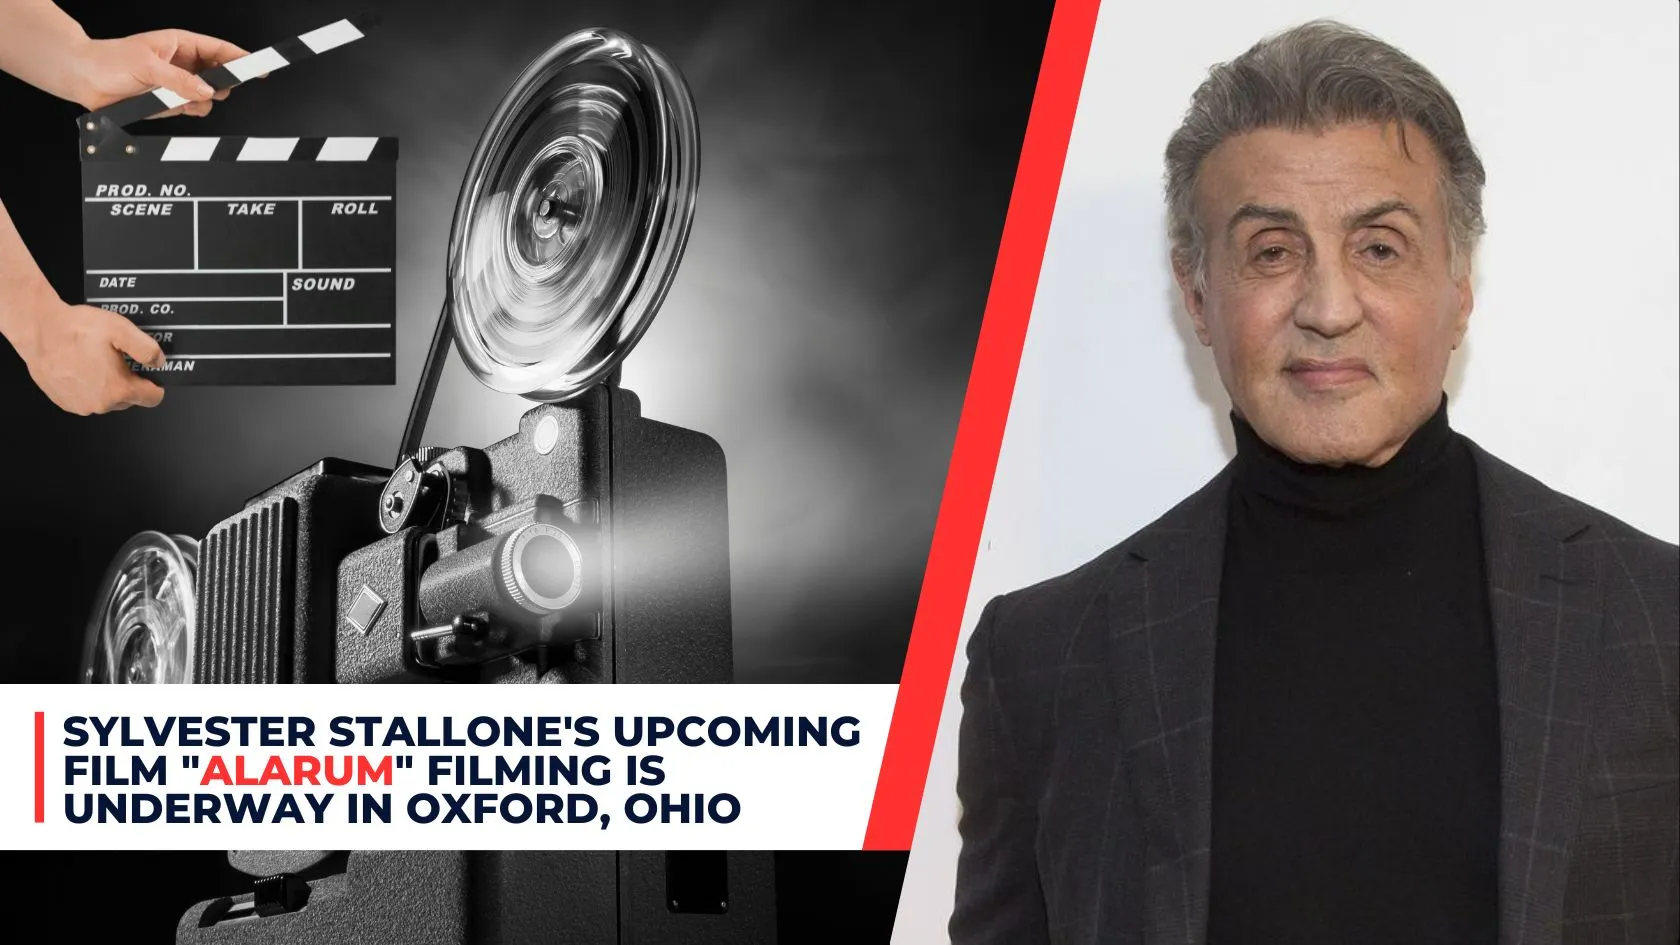 Sylvester Stallone's Upcoming Film _Alarm_ Filming is Underway in Oxford, Ohio